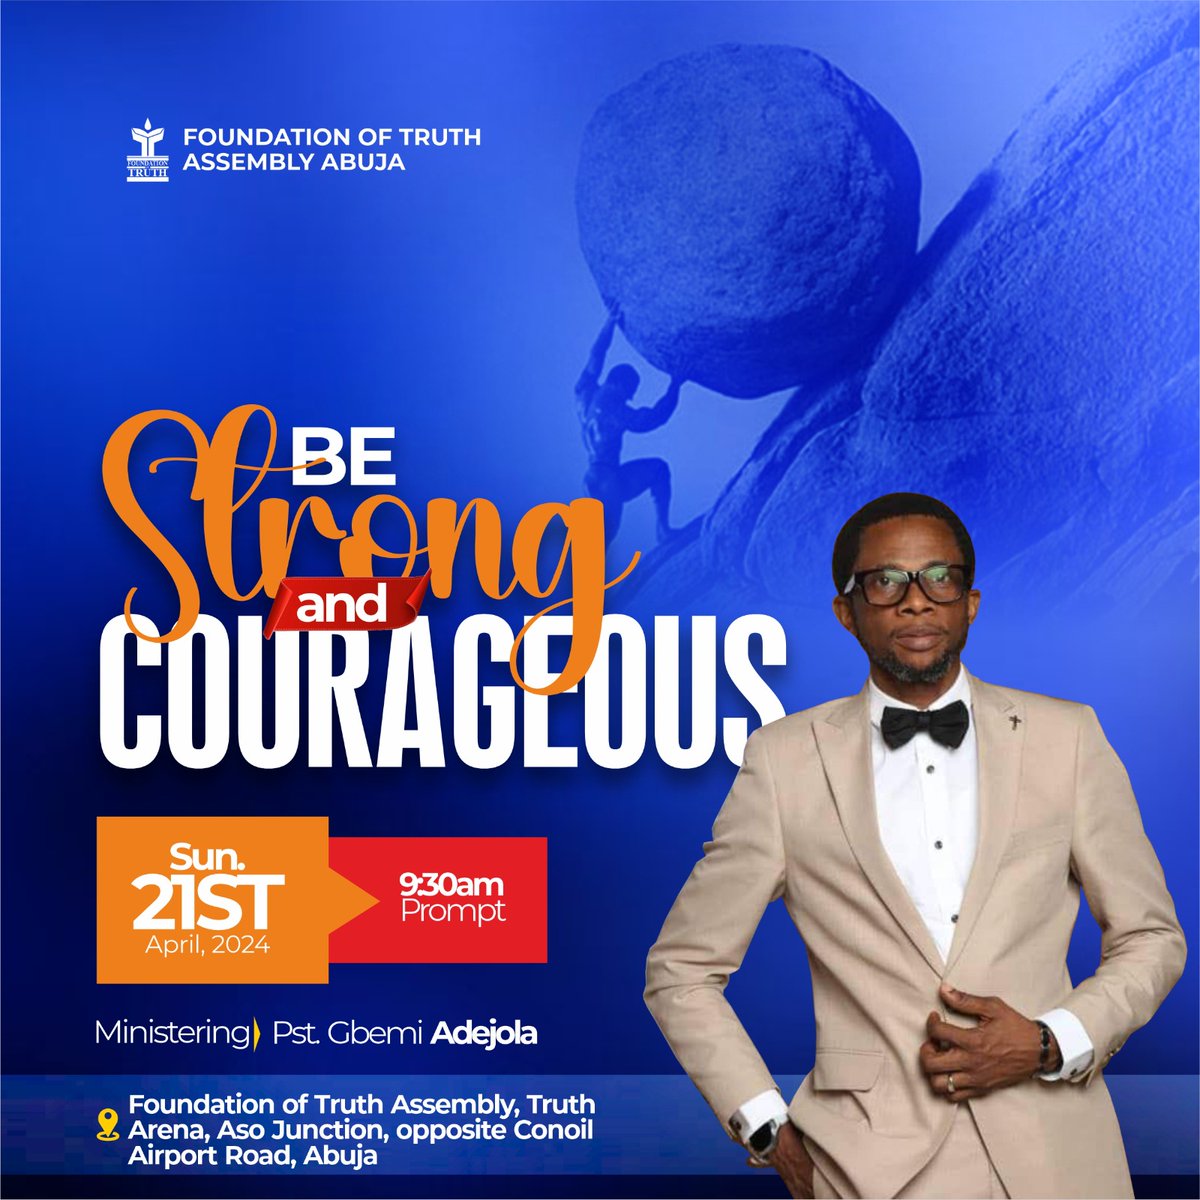 Welcome to Celebration Service. Join us today as we look into the Topic: Ne Strong and Courageous by our very own Pst. Gbemi Adejola.

#courage #courageous #sunday #dontmissout
#church #Godspeople